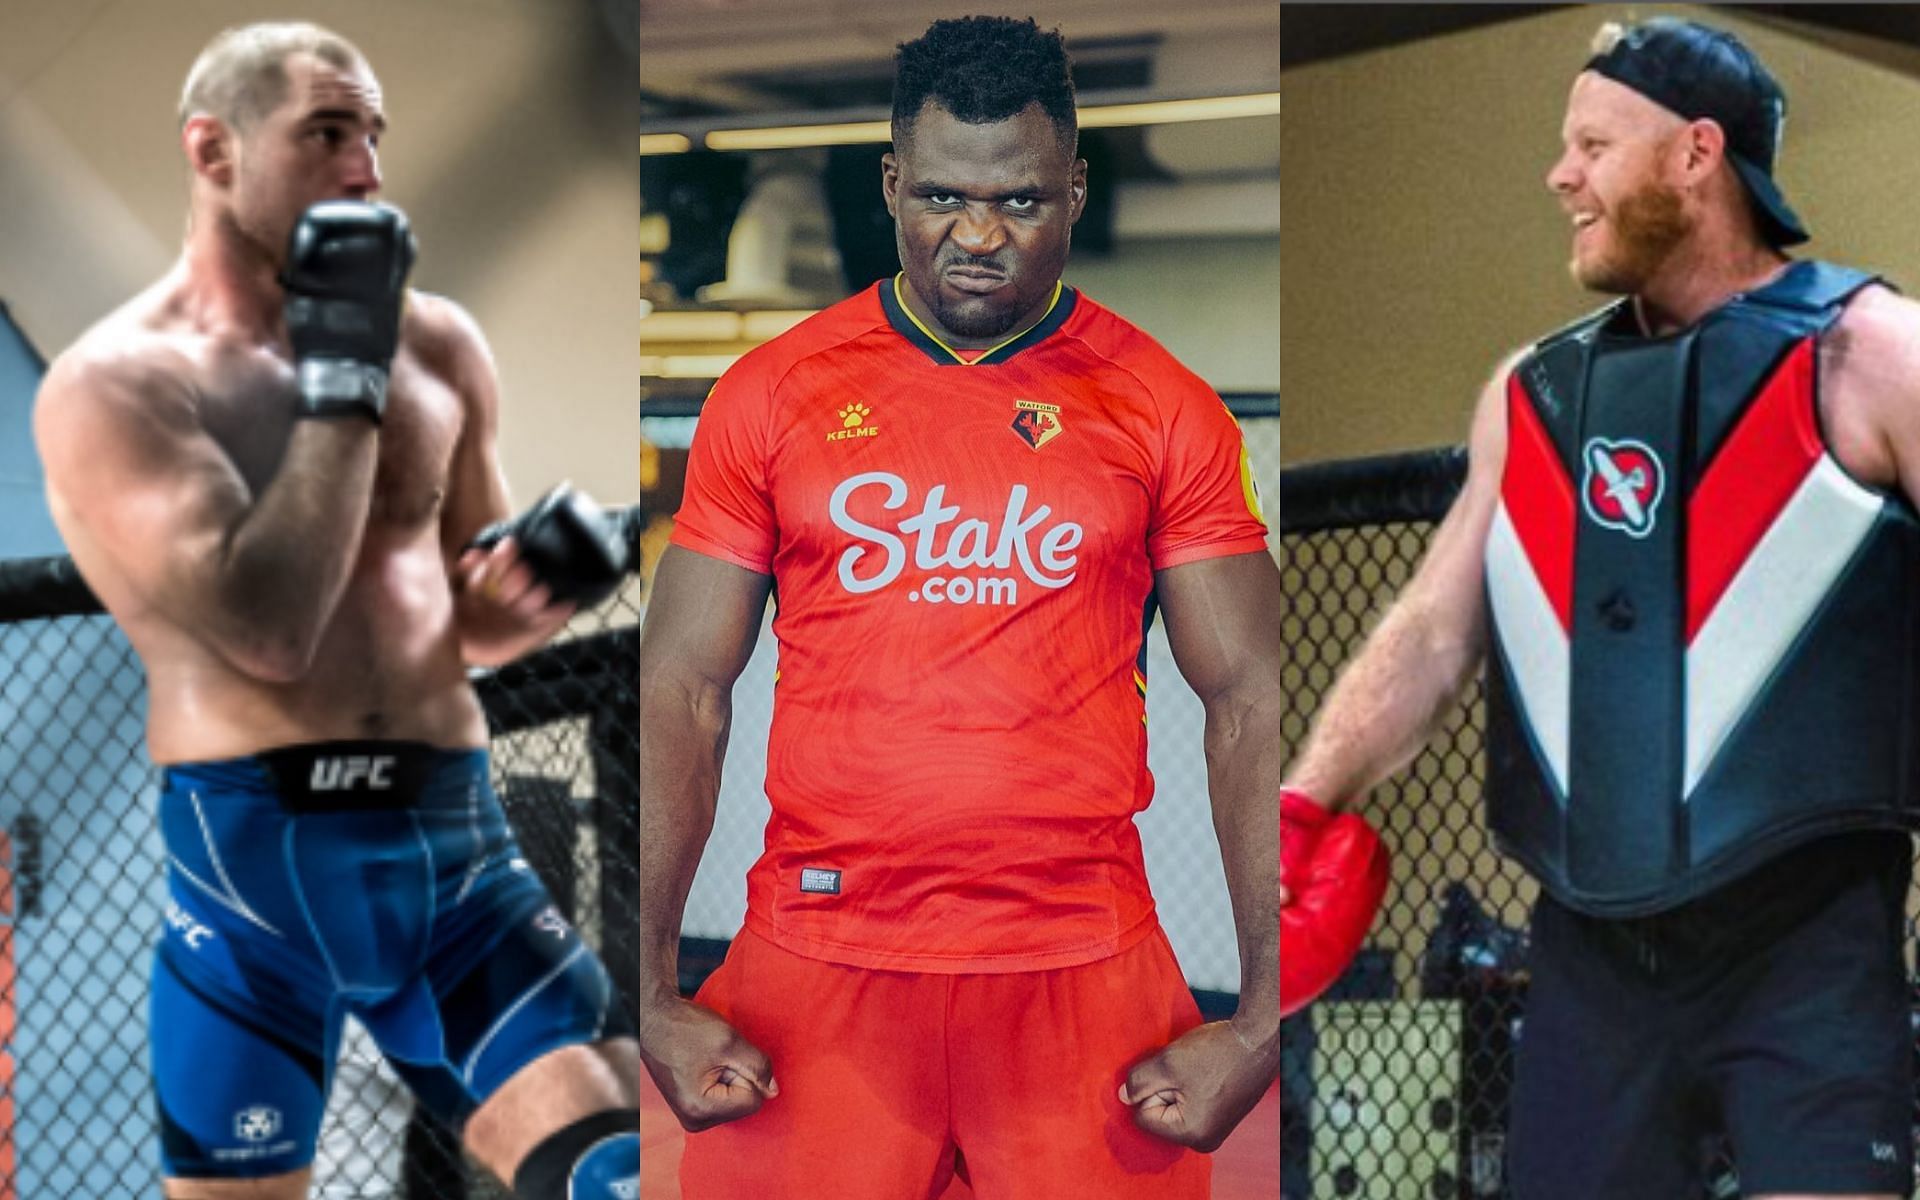 (L to R) Sean Strickland via Twitter @SStricklandMMA, Francis Ngannou and Eric Nicksick via Instagram @francisnagnnou, @eric_xcmma